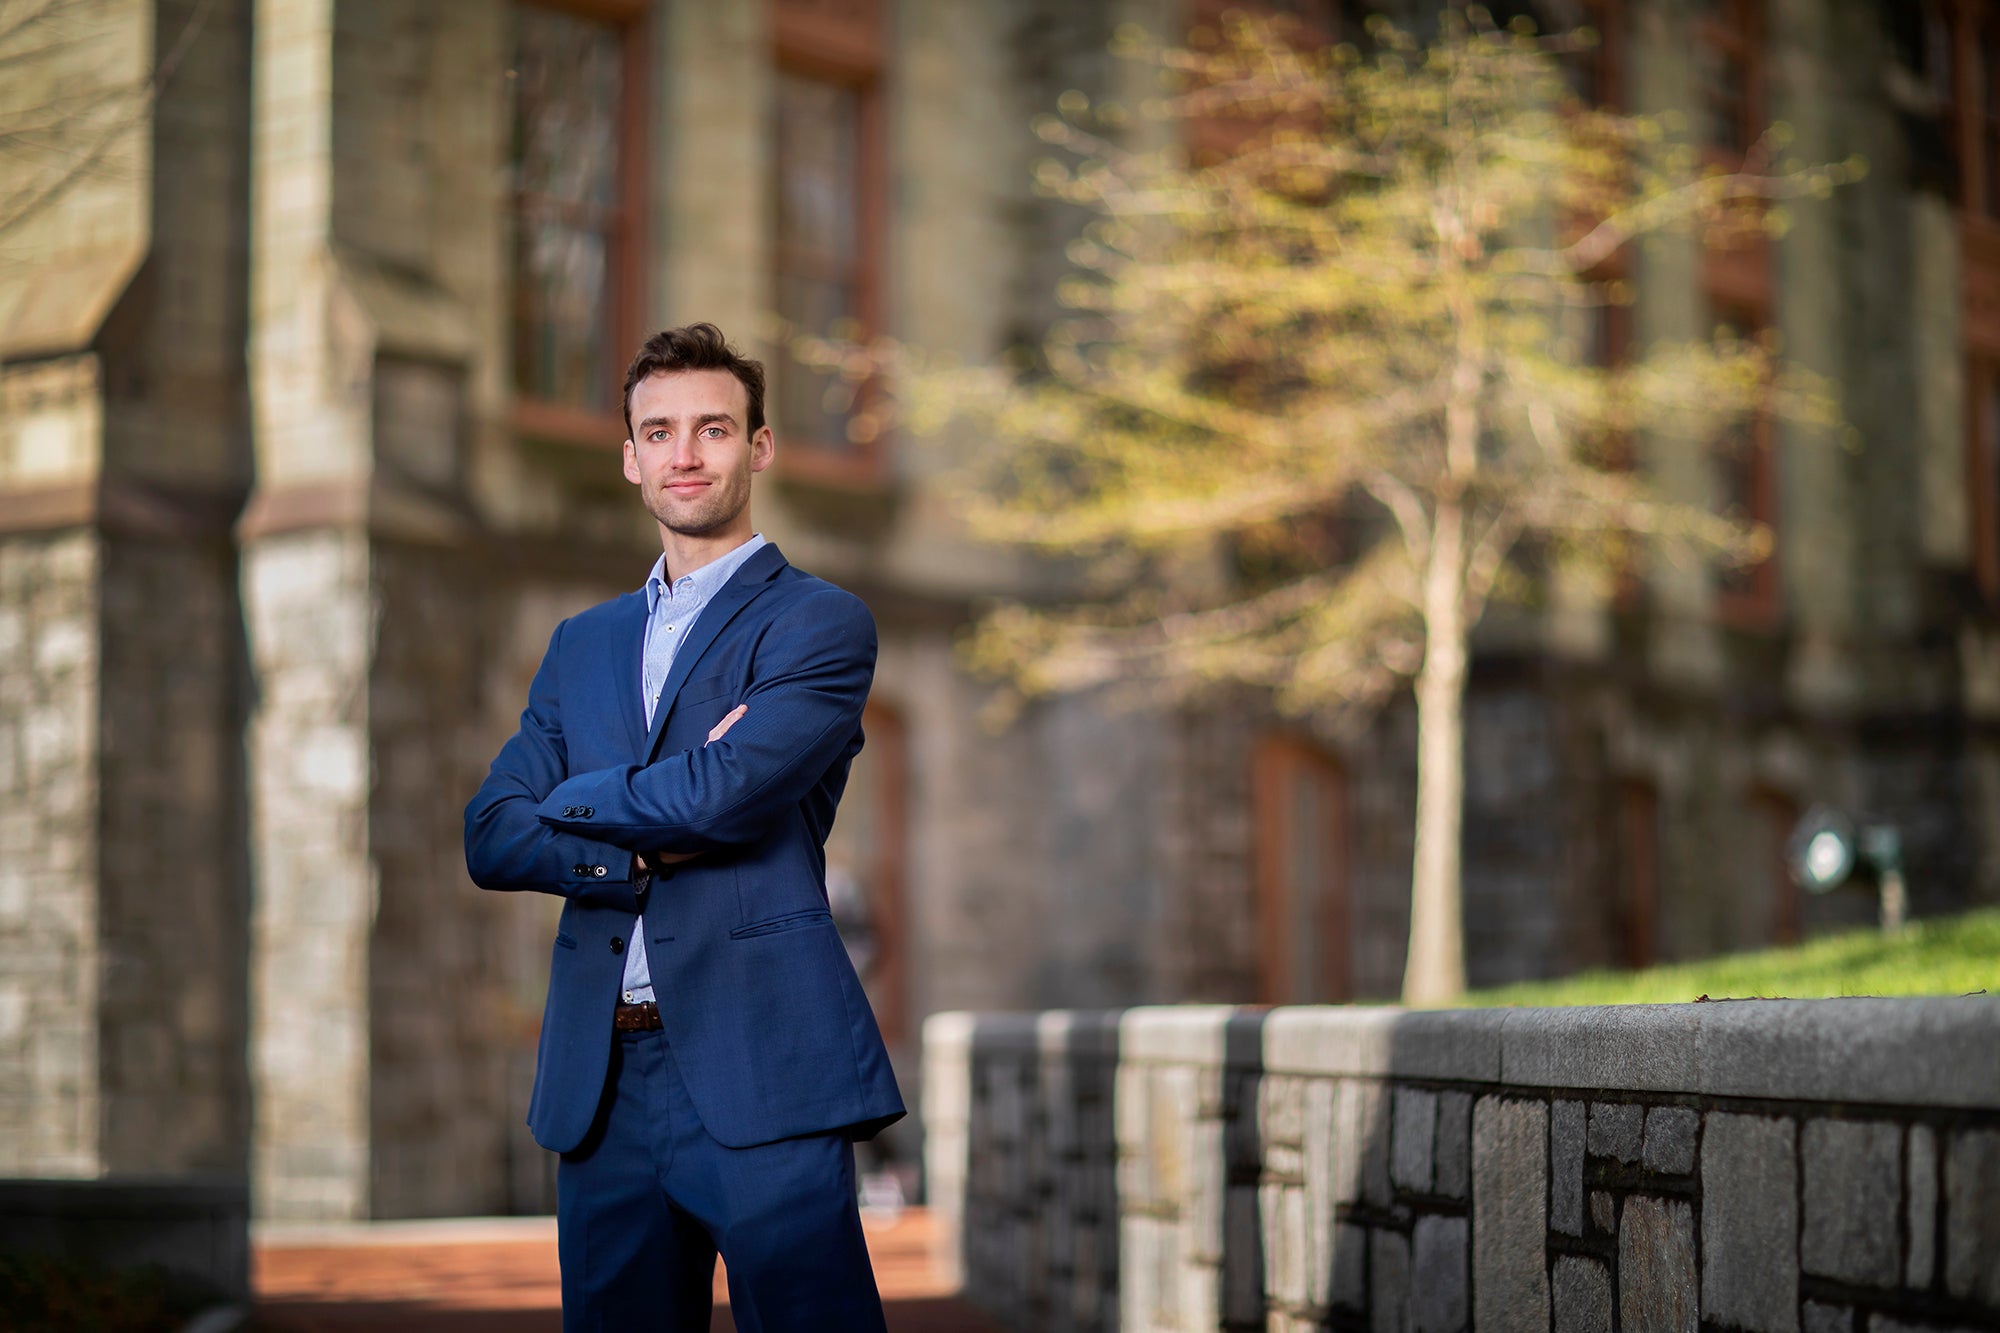 Sam Strickberger stands outside on College Green on Penn's campus